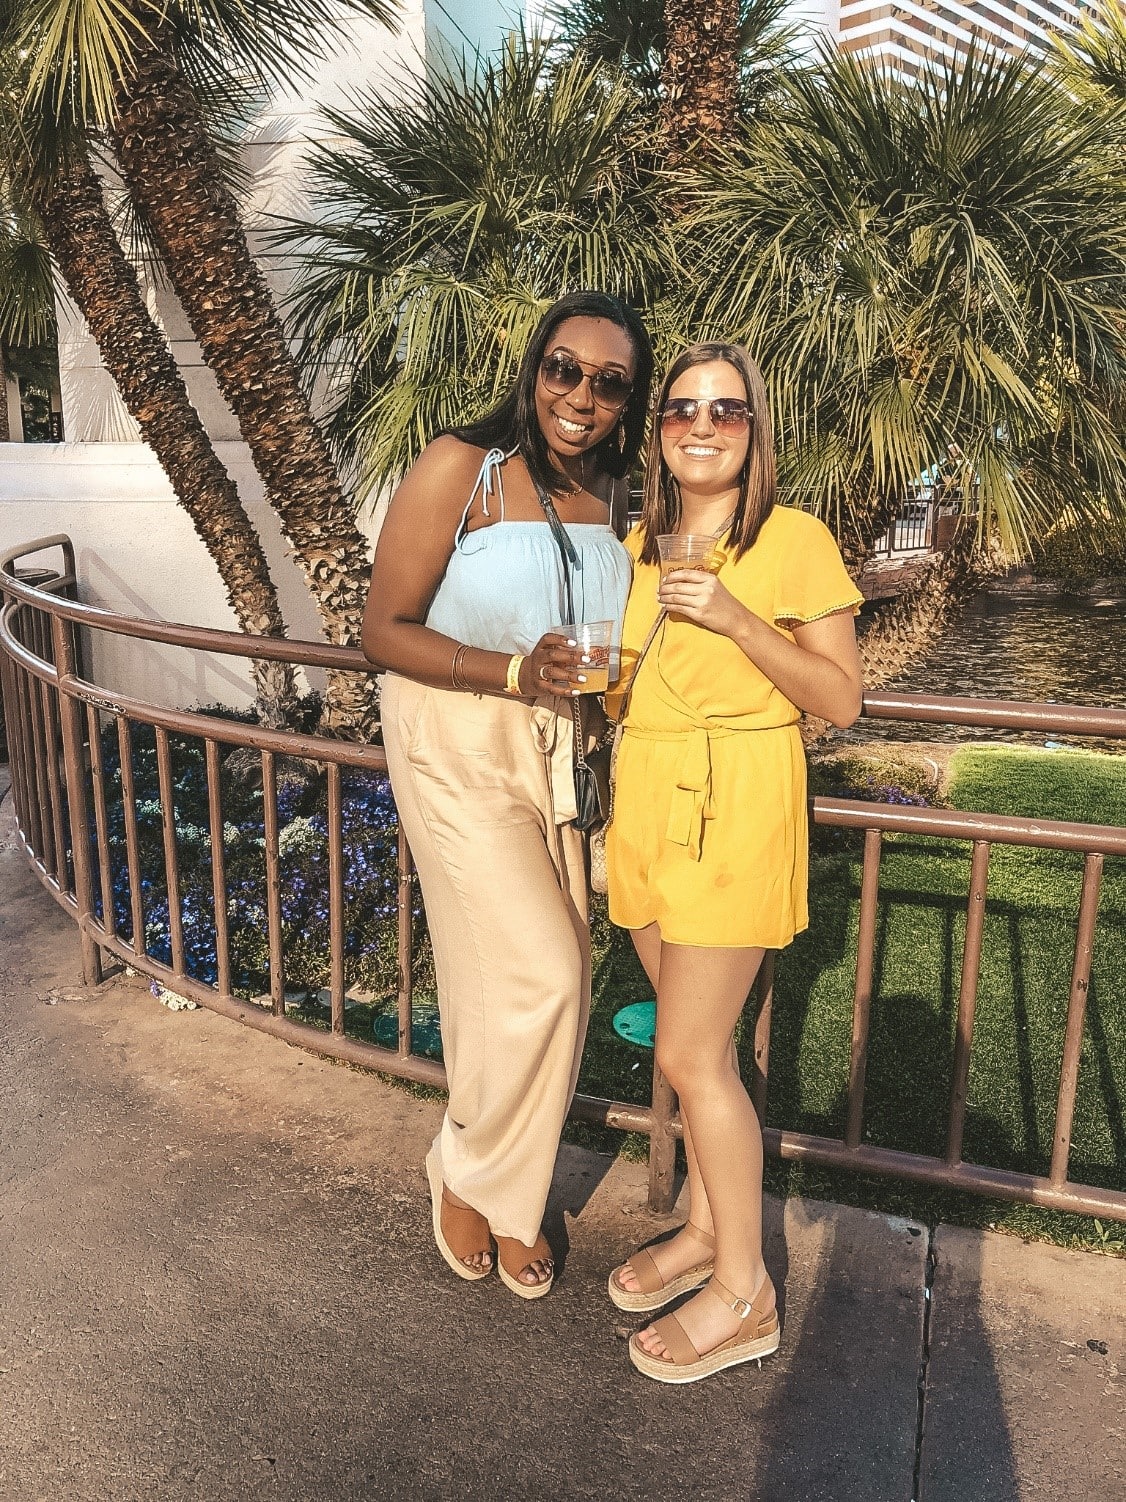 Las Vegas Packing List: What to Wear in Vegas + Outfit Ideas